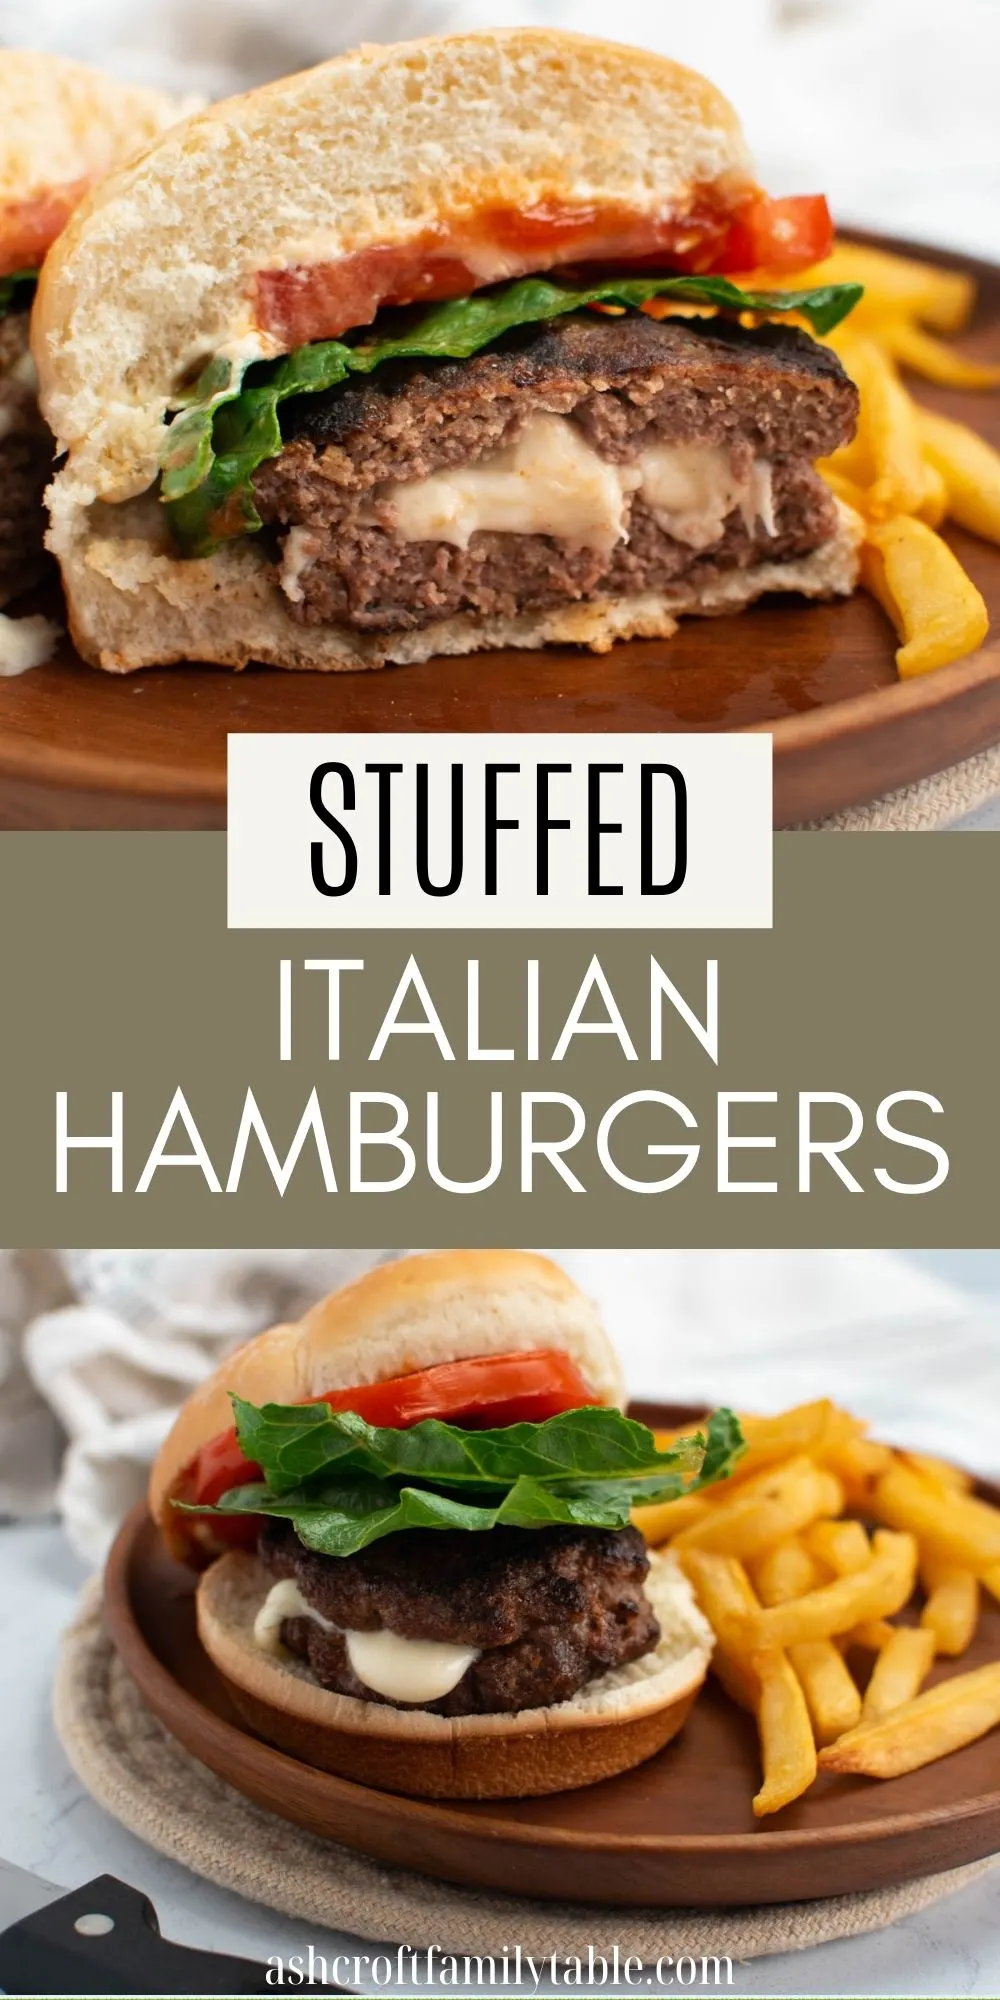 Pinterest graphic with text and photos of mozzarella stuffed hamburgers.